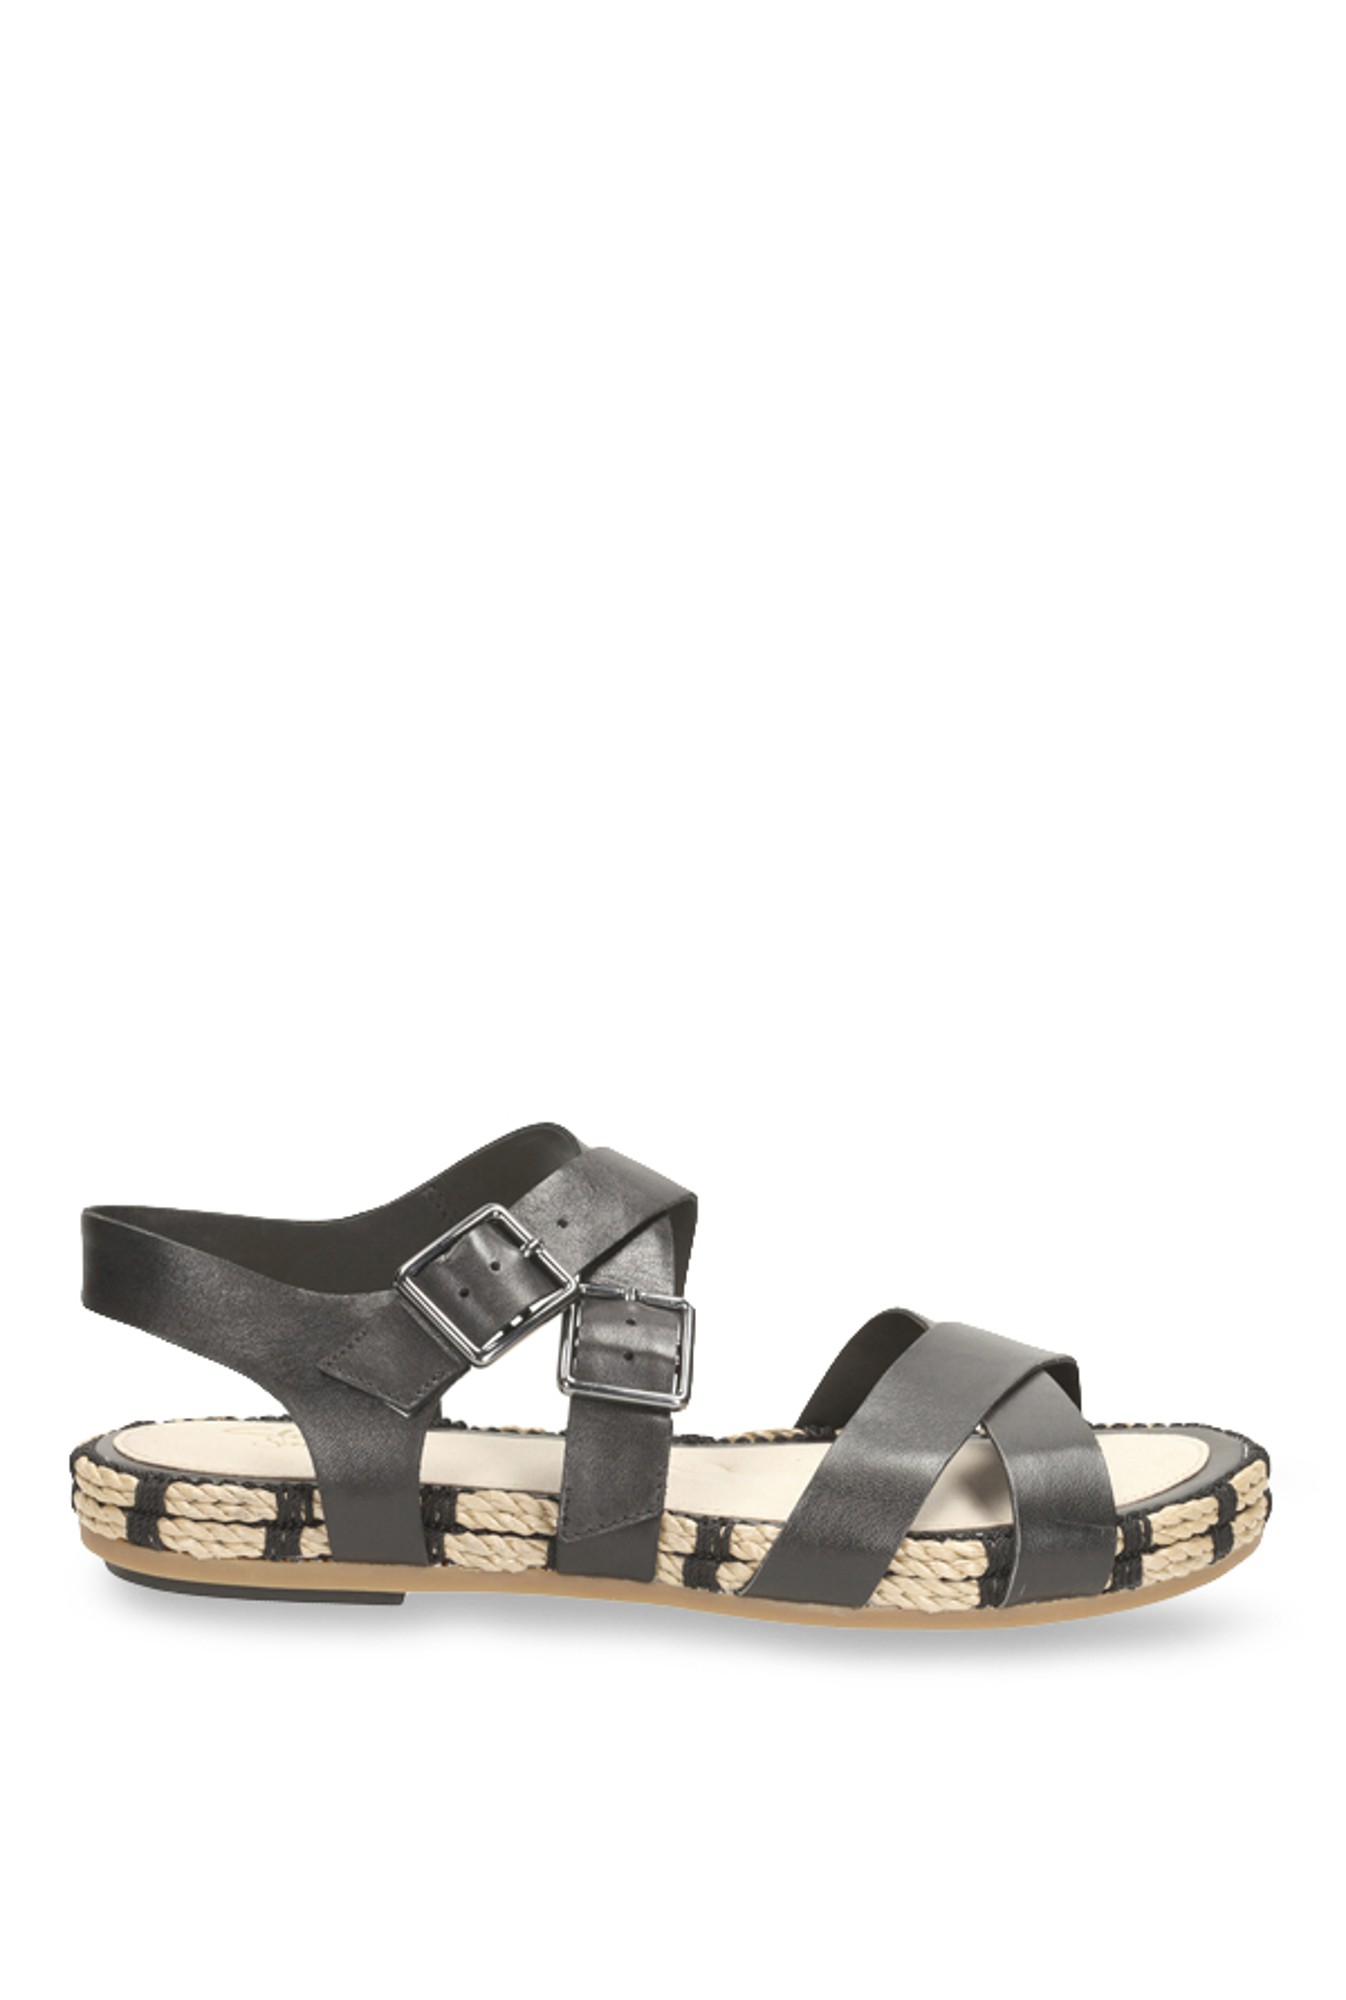 clarks treacle gold sandals